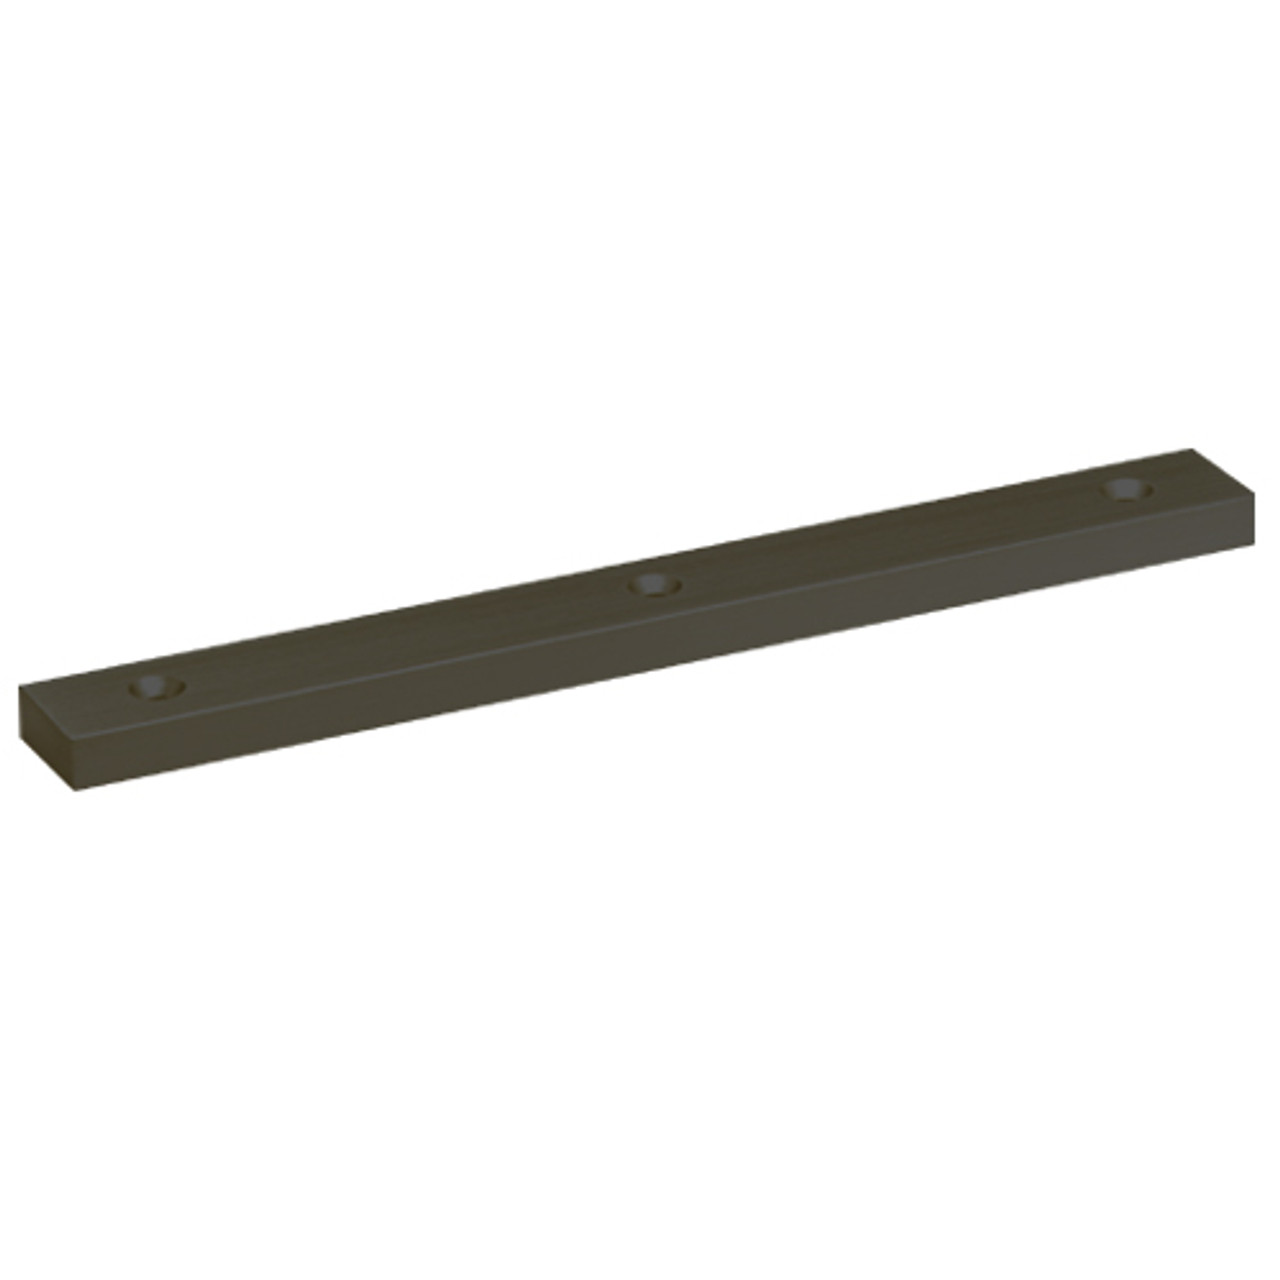 4322-US10B DynaLock 4000 Series Filler Plates for Double Maglocks in Oil Rubbed Bronze